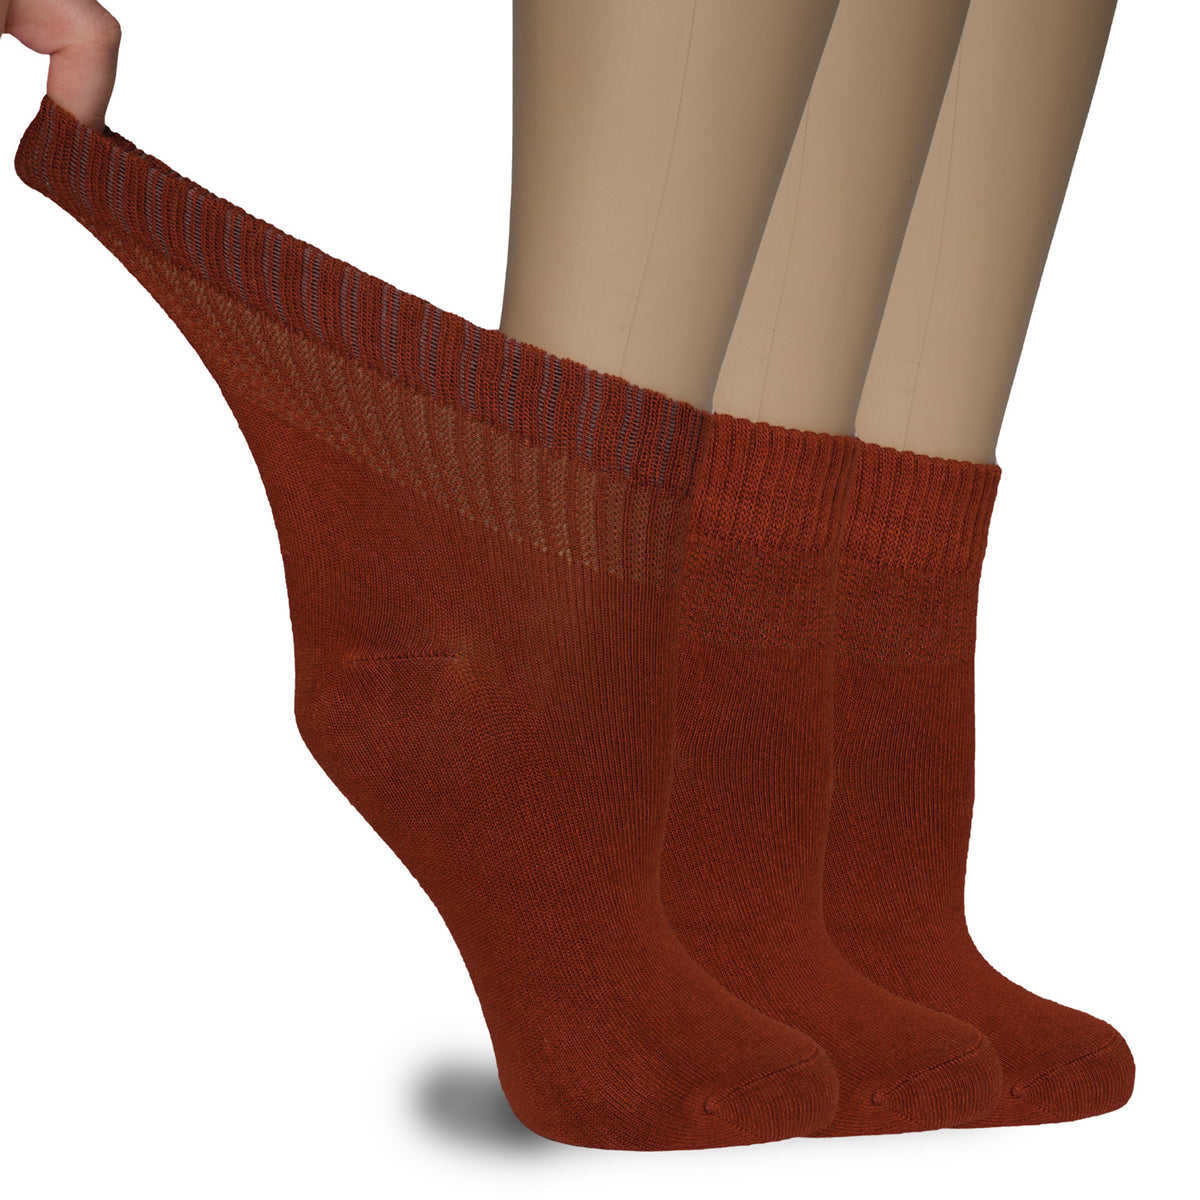 A woman's foot wearing Women's Diabetic Bamboo Ankle Socks in brown color. The socks are made of bamboo material, perfect for sensitive skin.